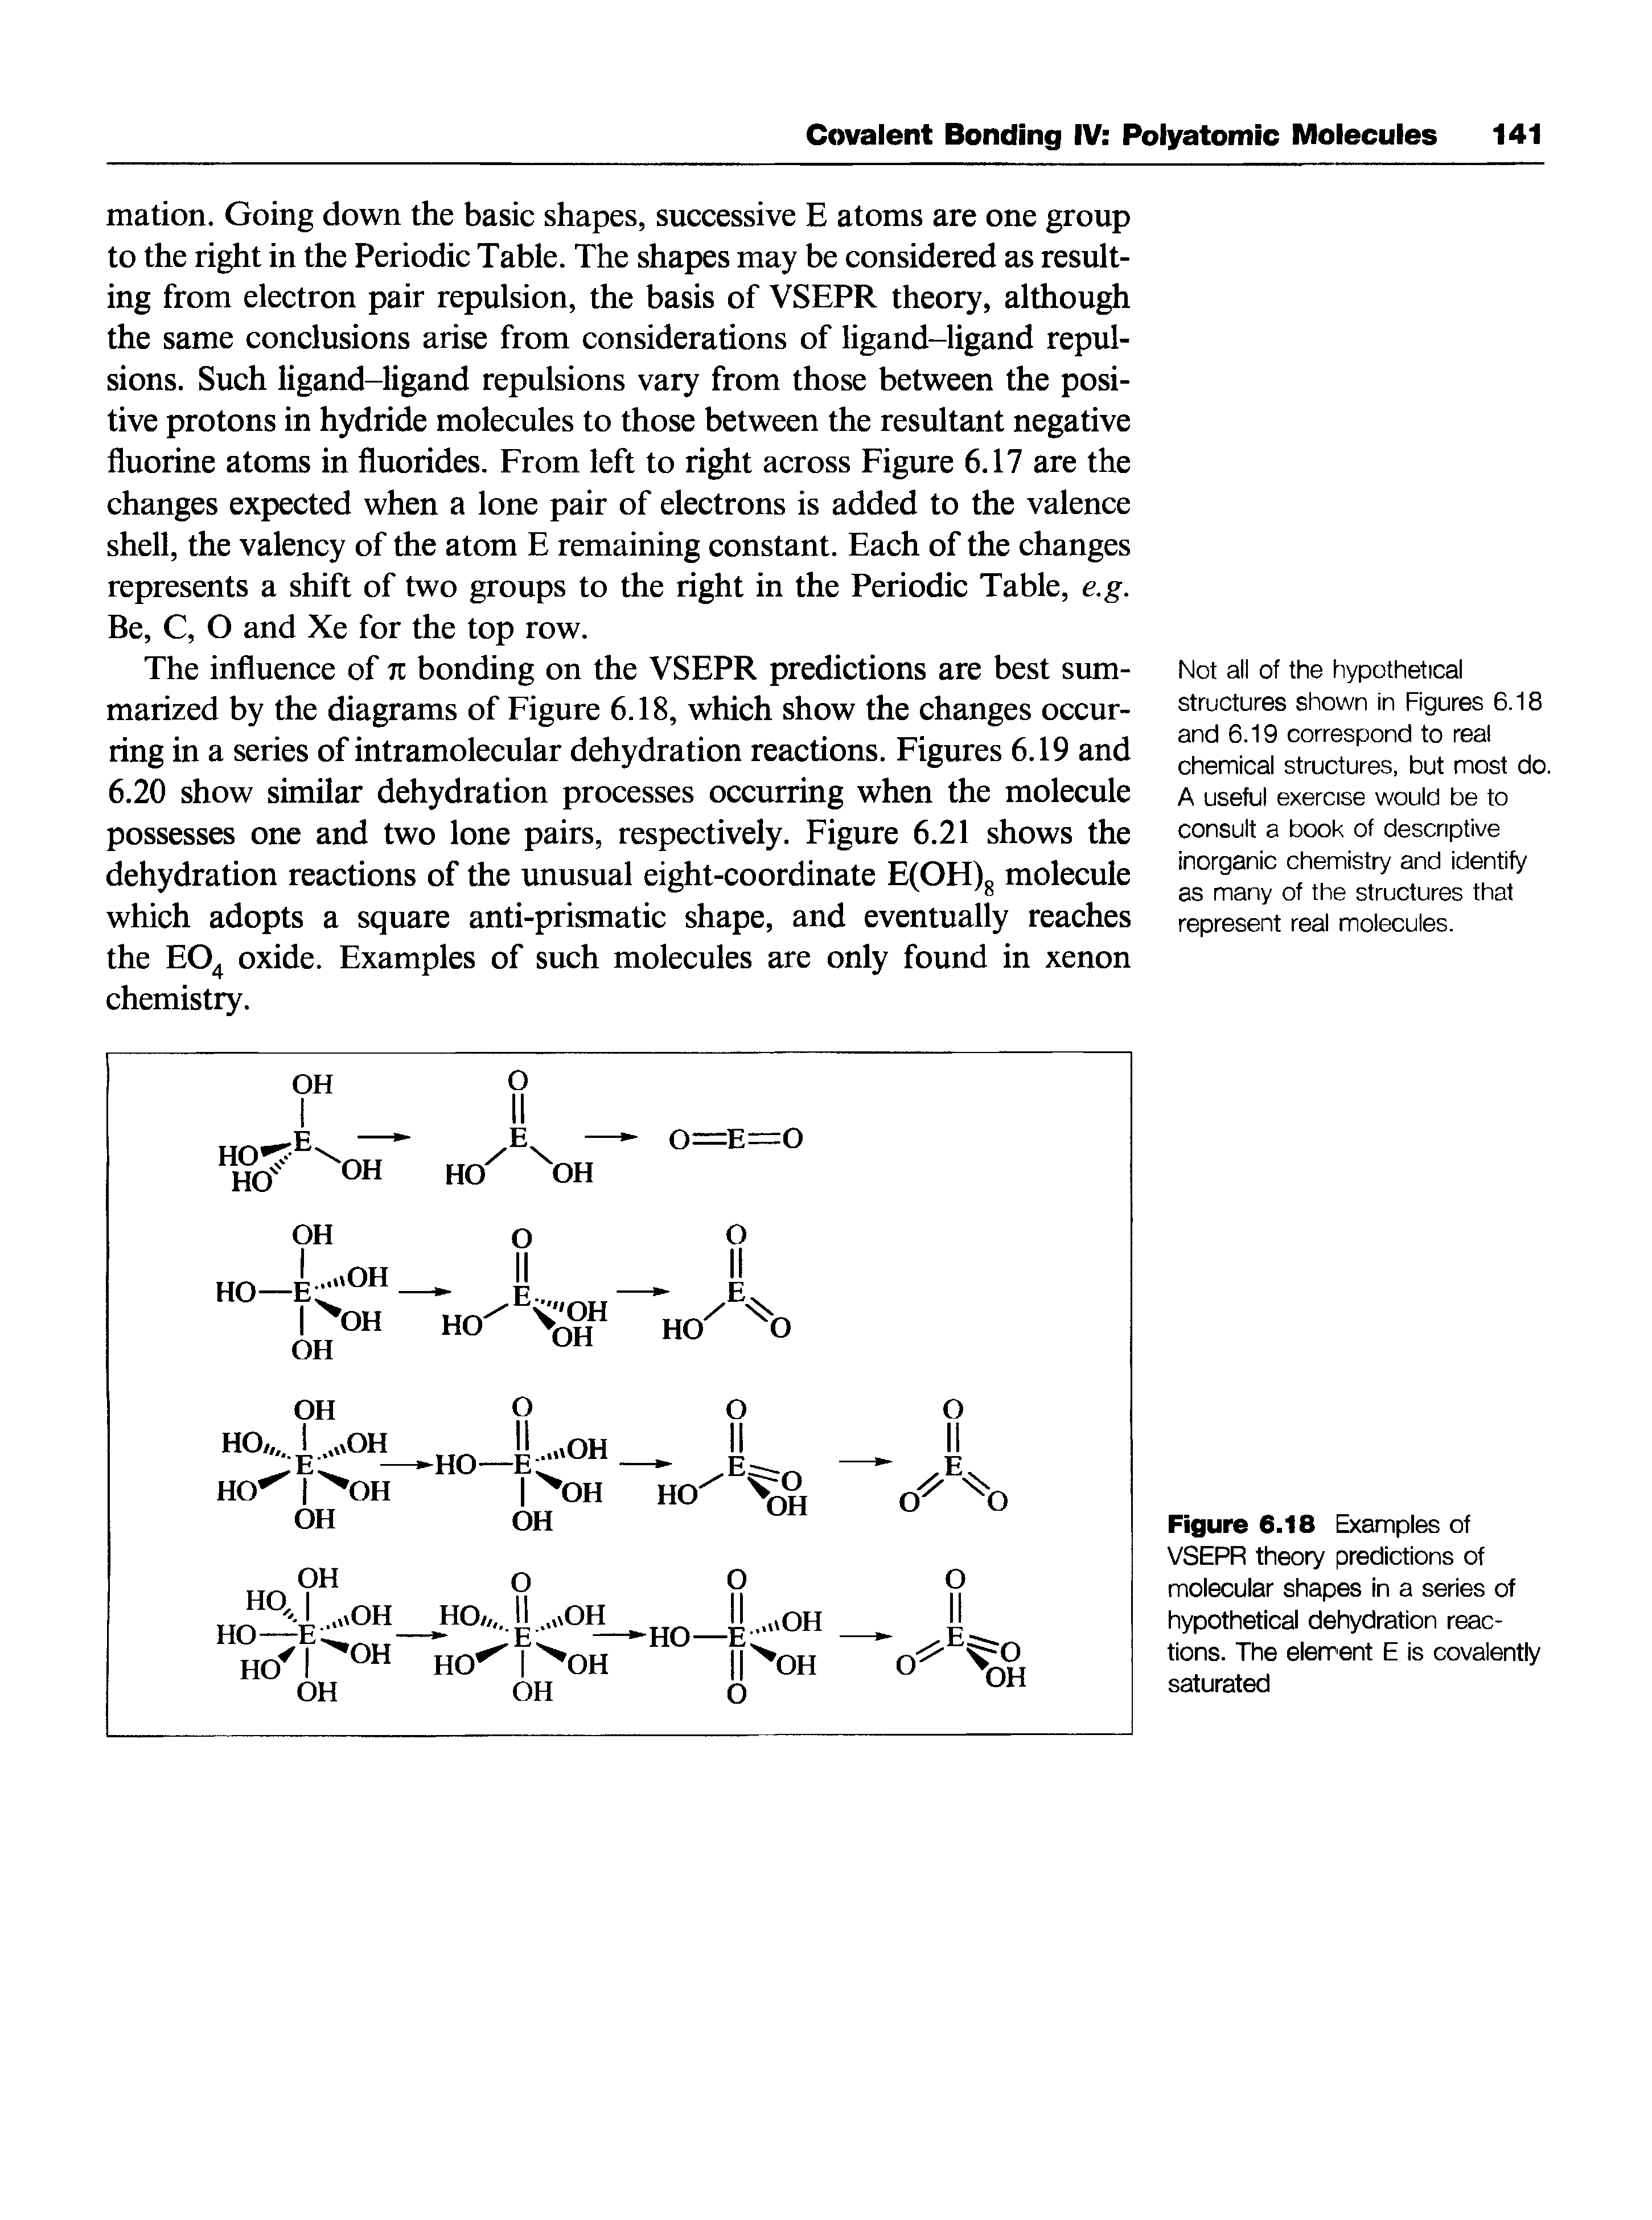 Figure 6.18 Examples of VSEPR theory predictions of molecular shapes in a series of hypothetical dehydration reactions. The element E is covalently saturated...